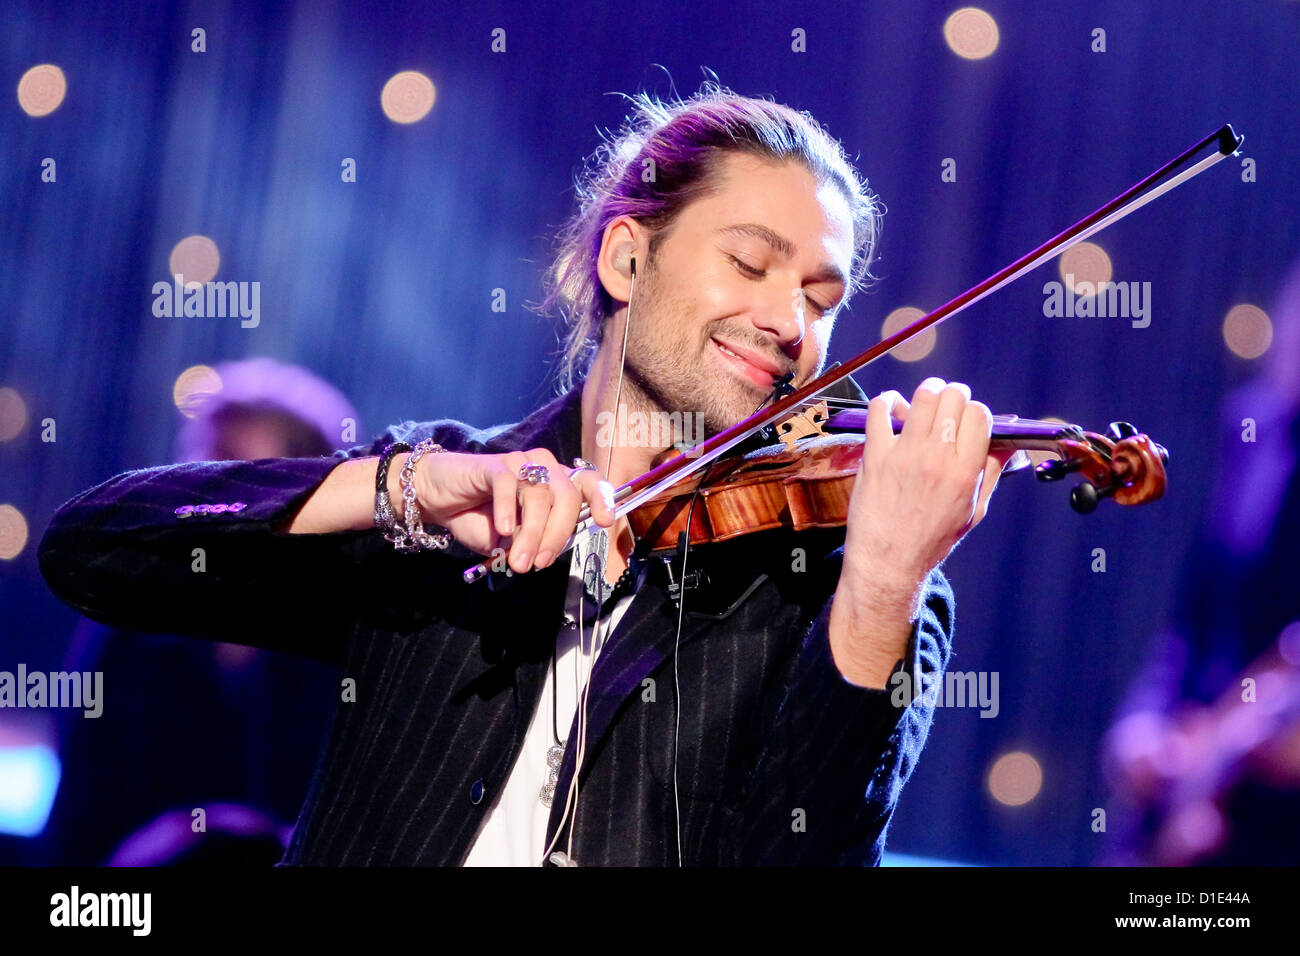 Star violin player David Garrett performs at the 18th Jose Carreras Gala at the New Trade Fair in Leipzig, Germany, 13 December 2012. The show was broadcast live by German television channel ARD. Photo: ANDREAS LANDER Stock Photo